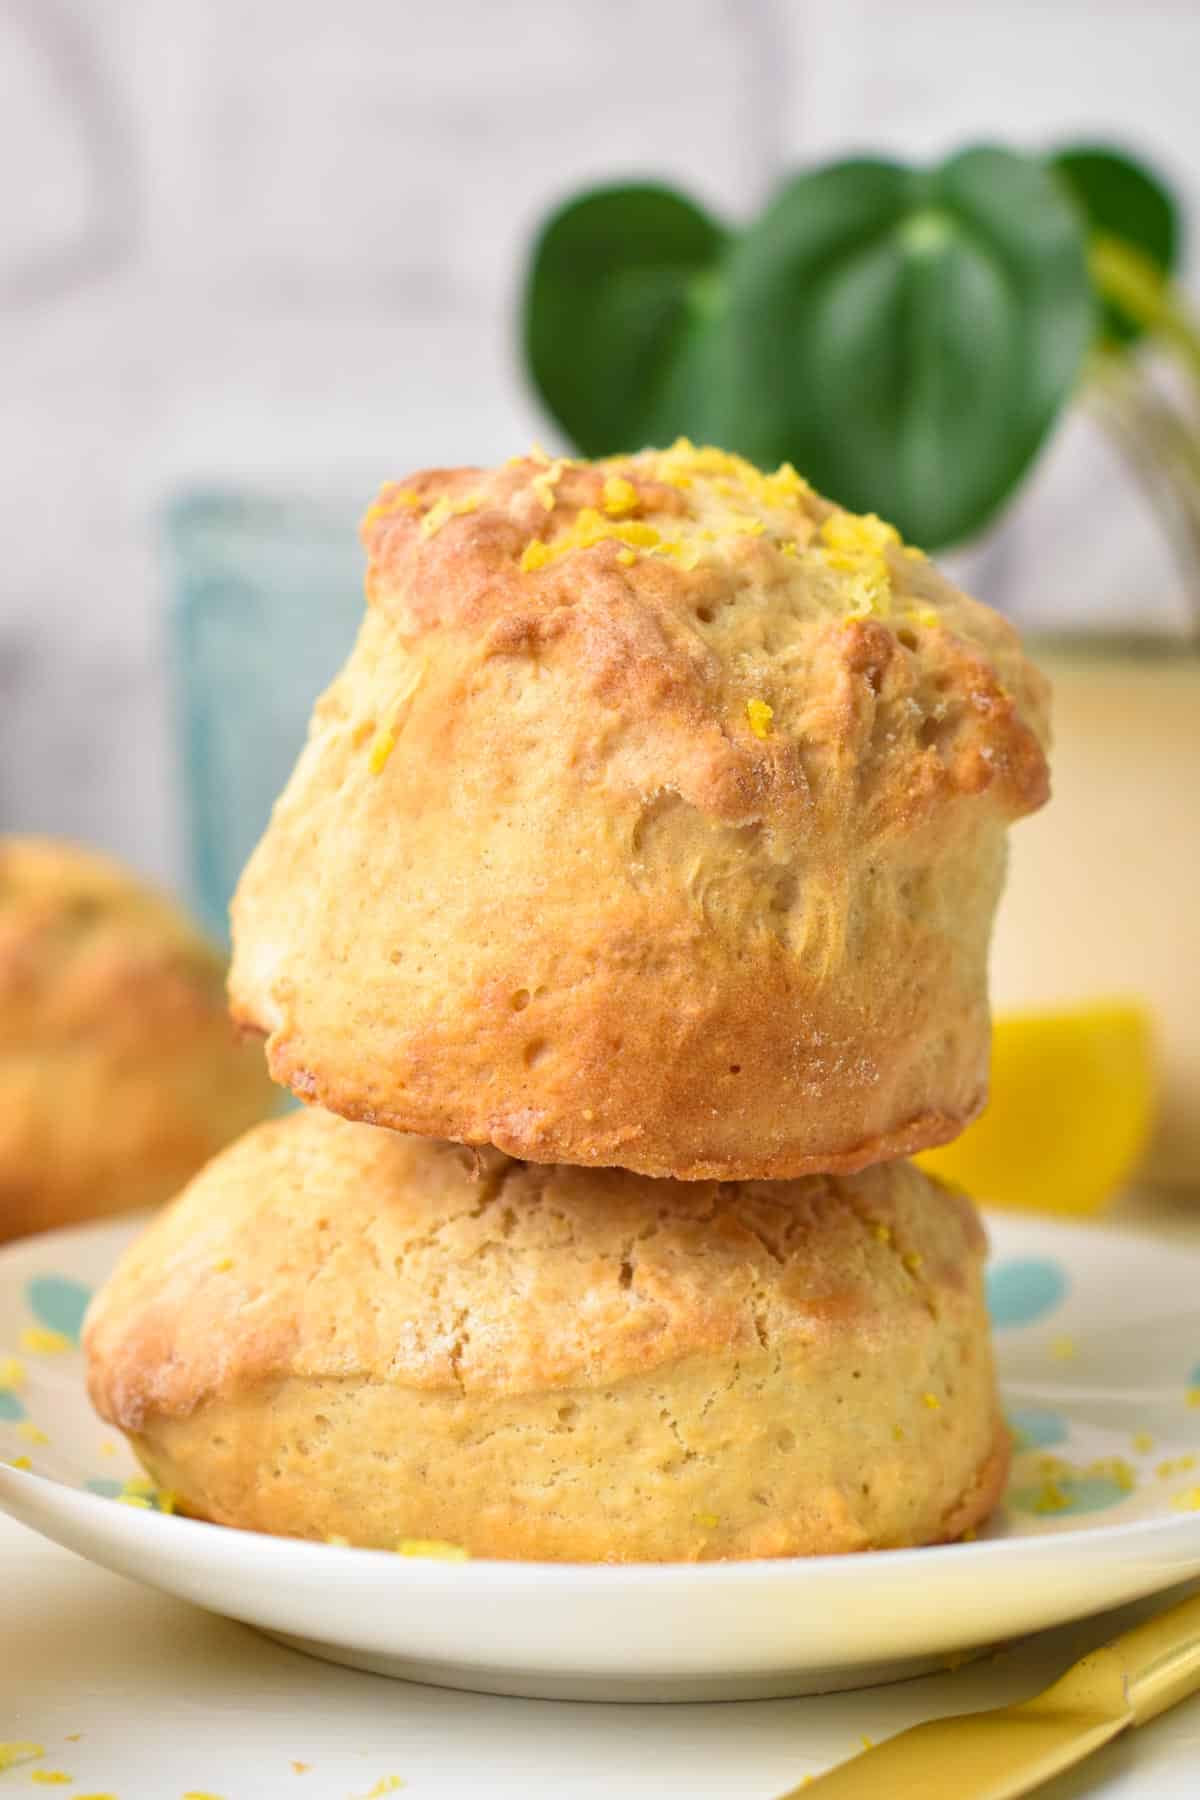 A stack of two ultra thick and fluffy lemonade scones with lemon zest on top and green plant in the background.